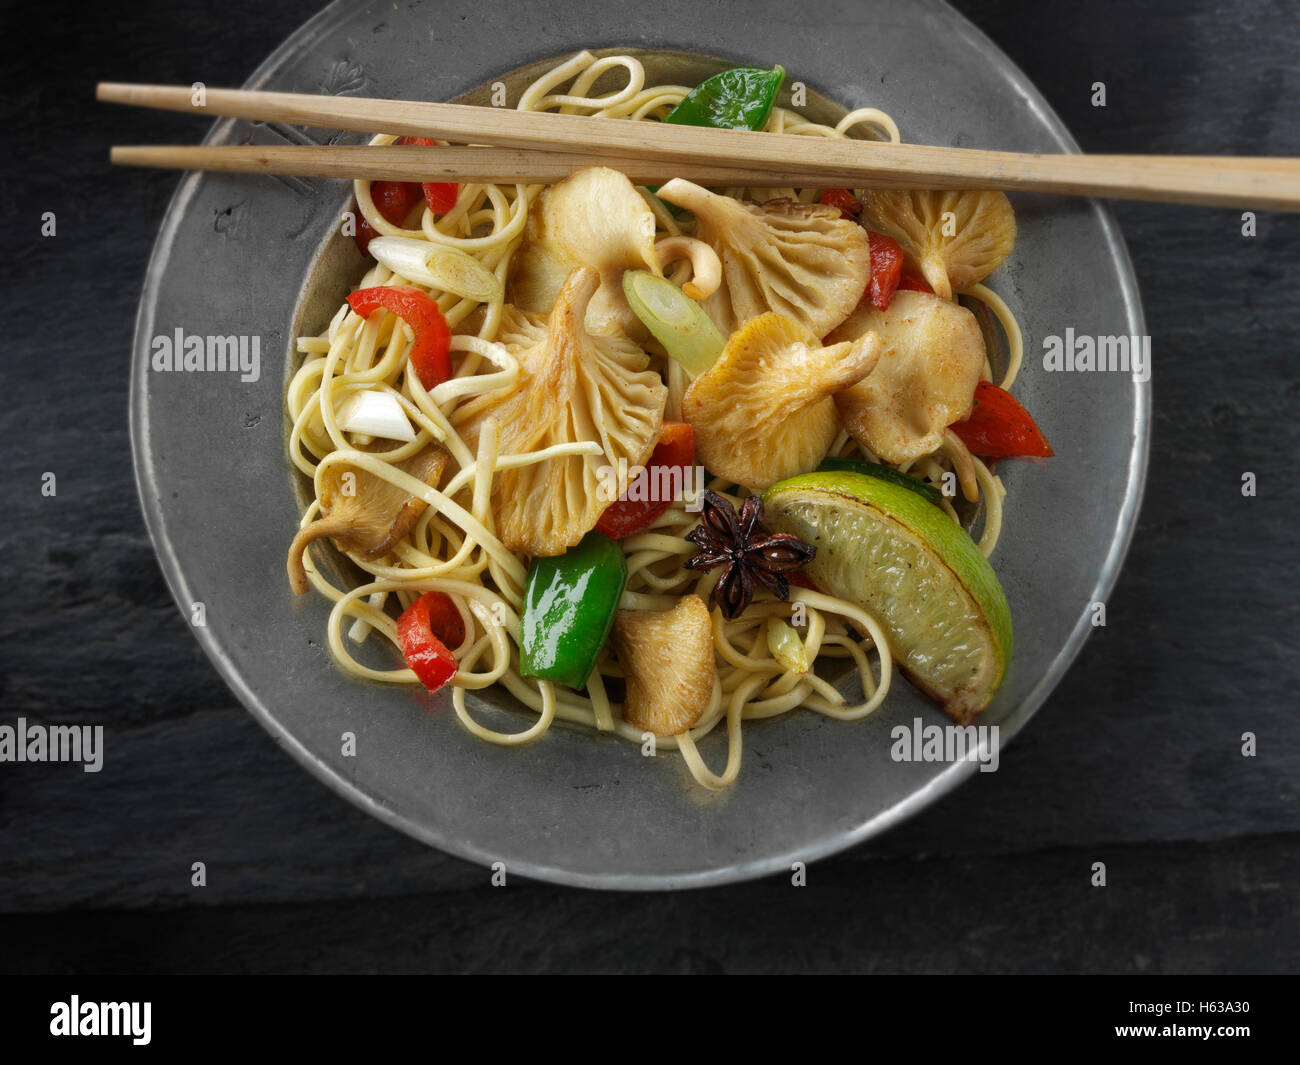 Yellow Oyster mushroom stir fry with noodles, mange tout, red pepper, spring onions and start anise Stock Photo